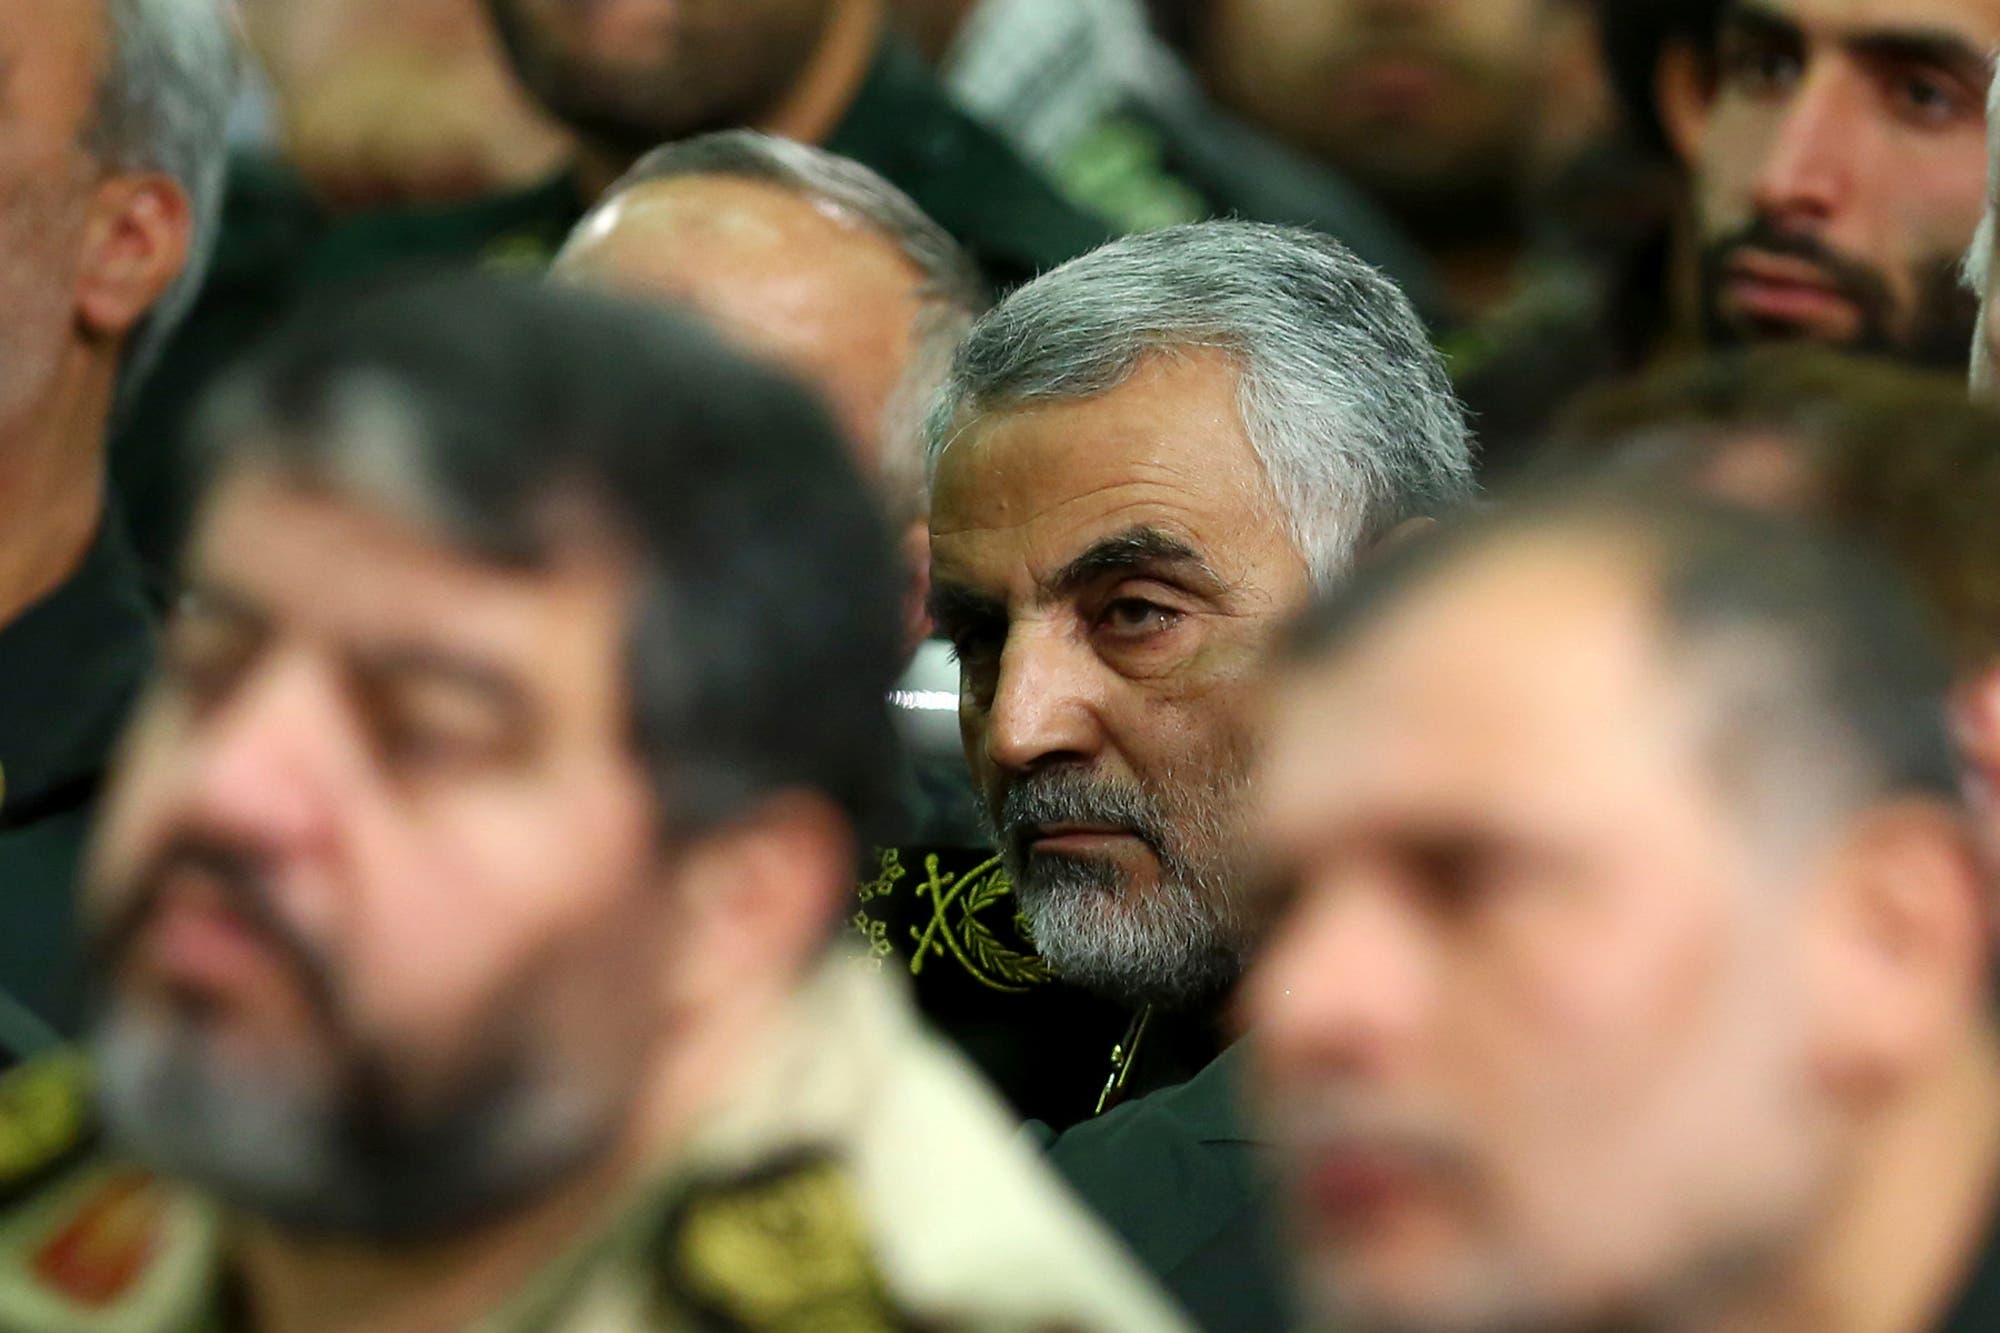 In this Tuesday, Sept. 17, 2013 file photo, head of the elite Quds force of Iran's Revolutionary Guard, Qassem Soleimani, attends a meeting of the commanders of the Revolutionary Guard. (AP)